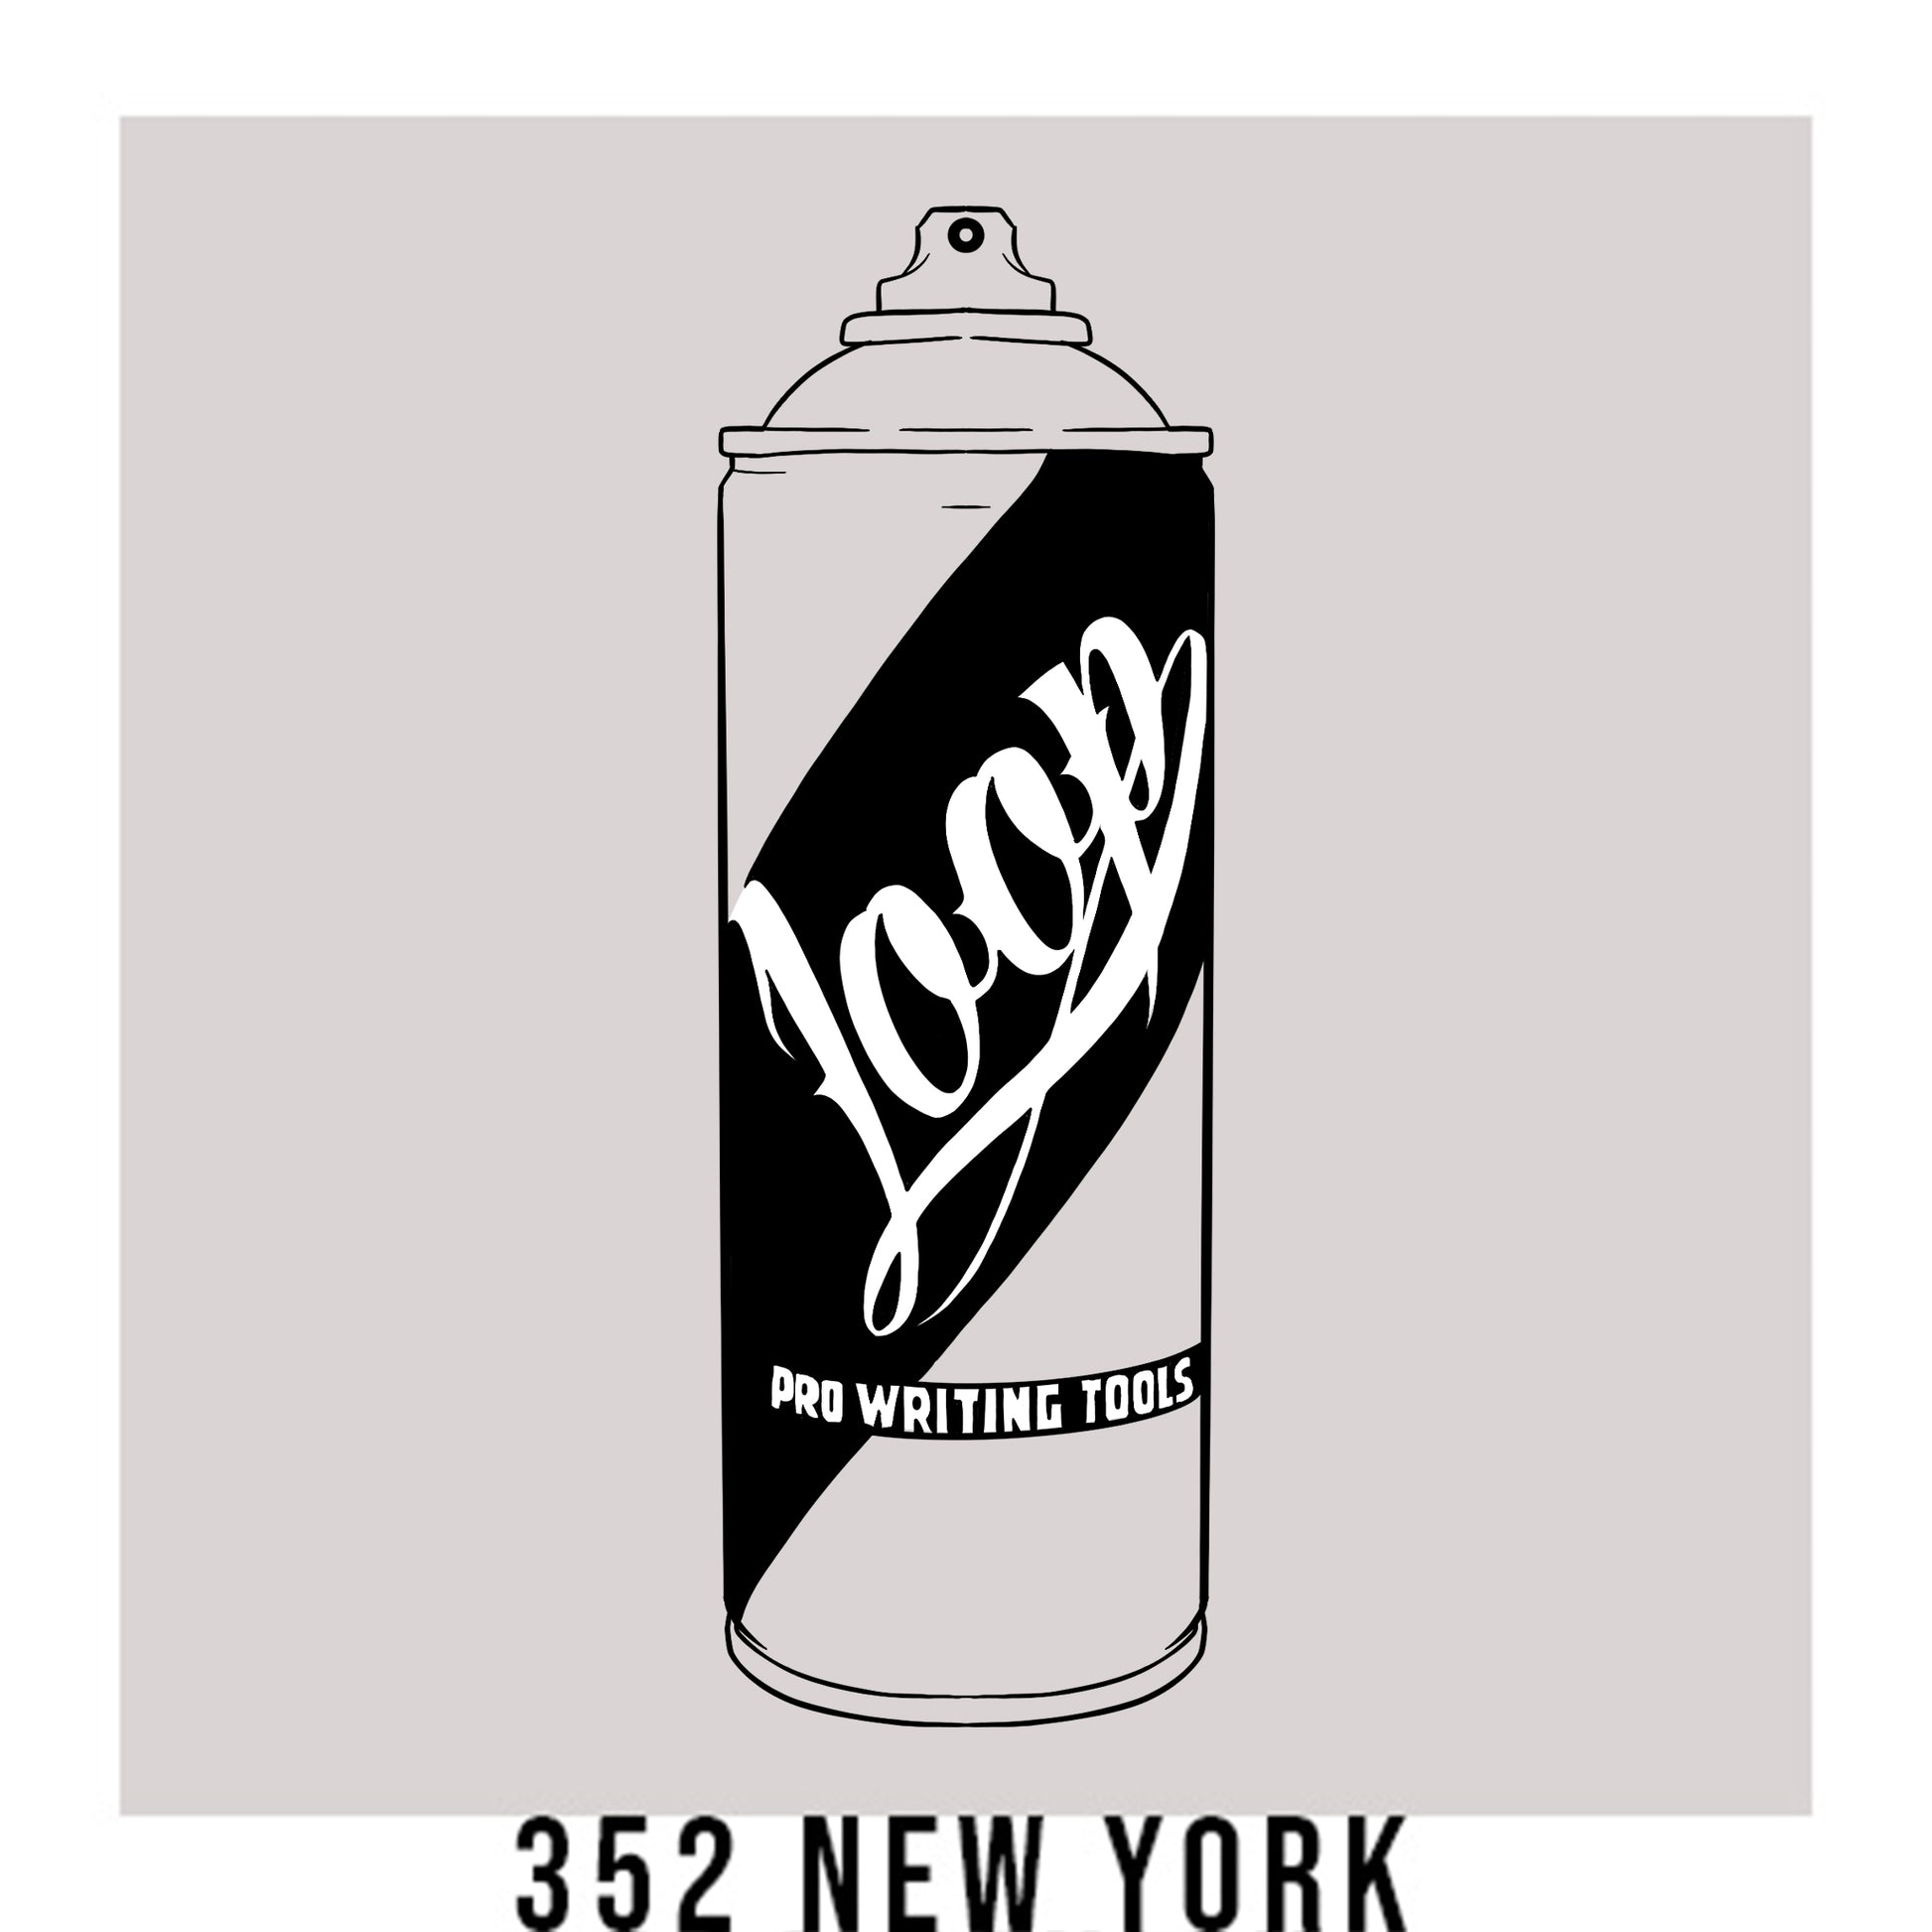 A black outline drawing of a light grey spray paint can with the word "Loop" written on the face in script. The background is a color swatch of the same light grey with a white border with the words "352 New York" at the bottom.